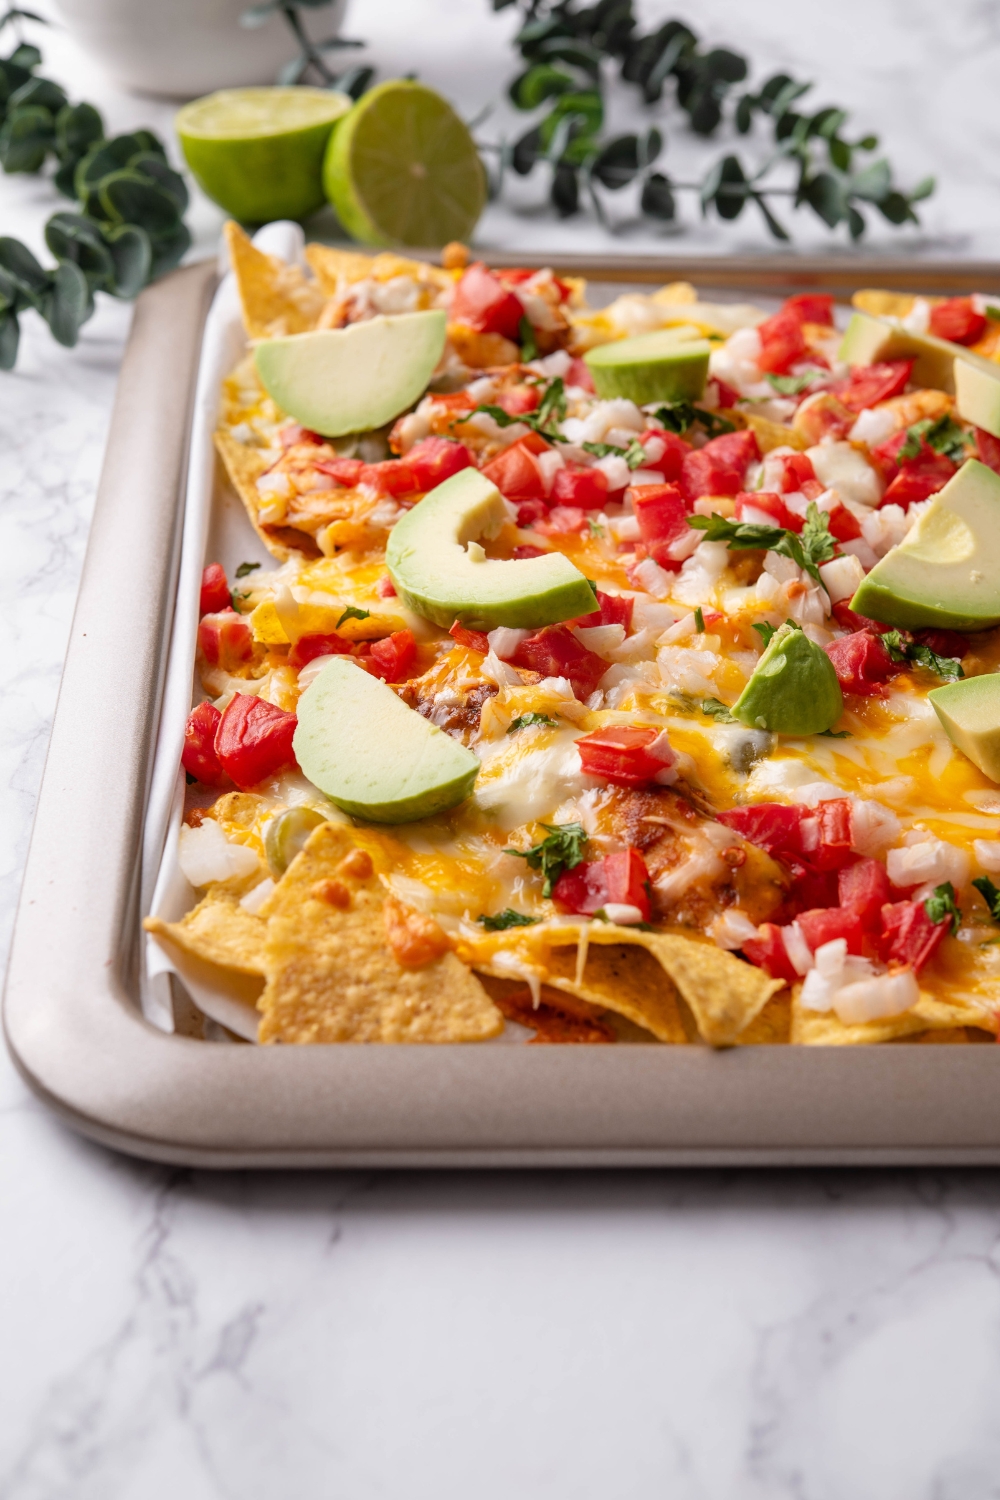 A baking sheet lined with parchment paper topped with seasoned chicken, melted cheese, pico de gallo, and sliced avocado.